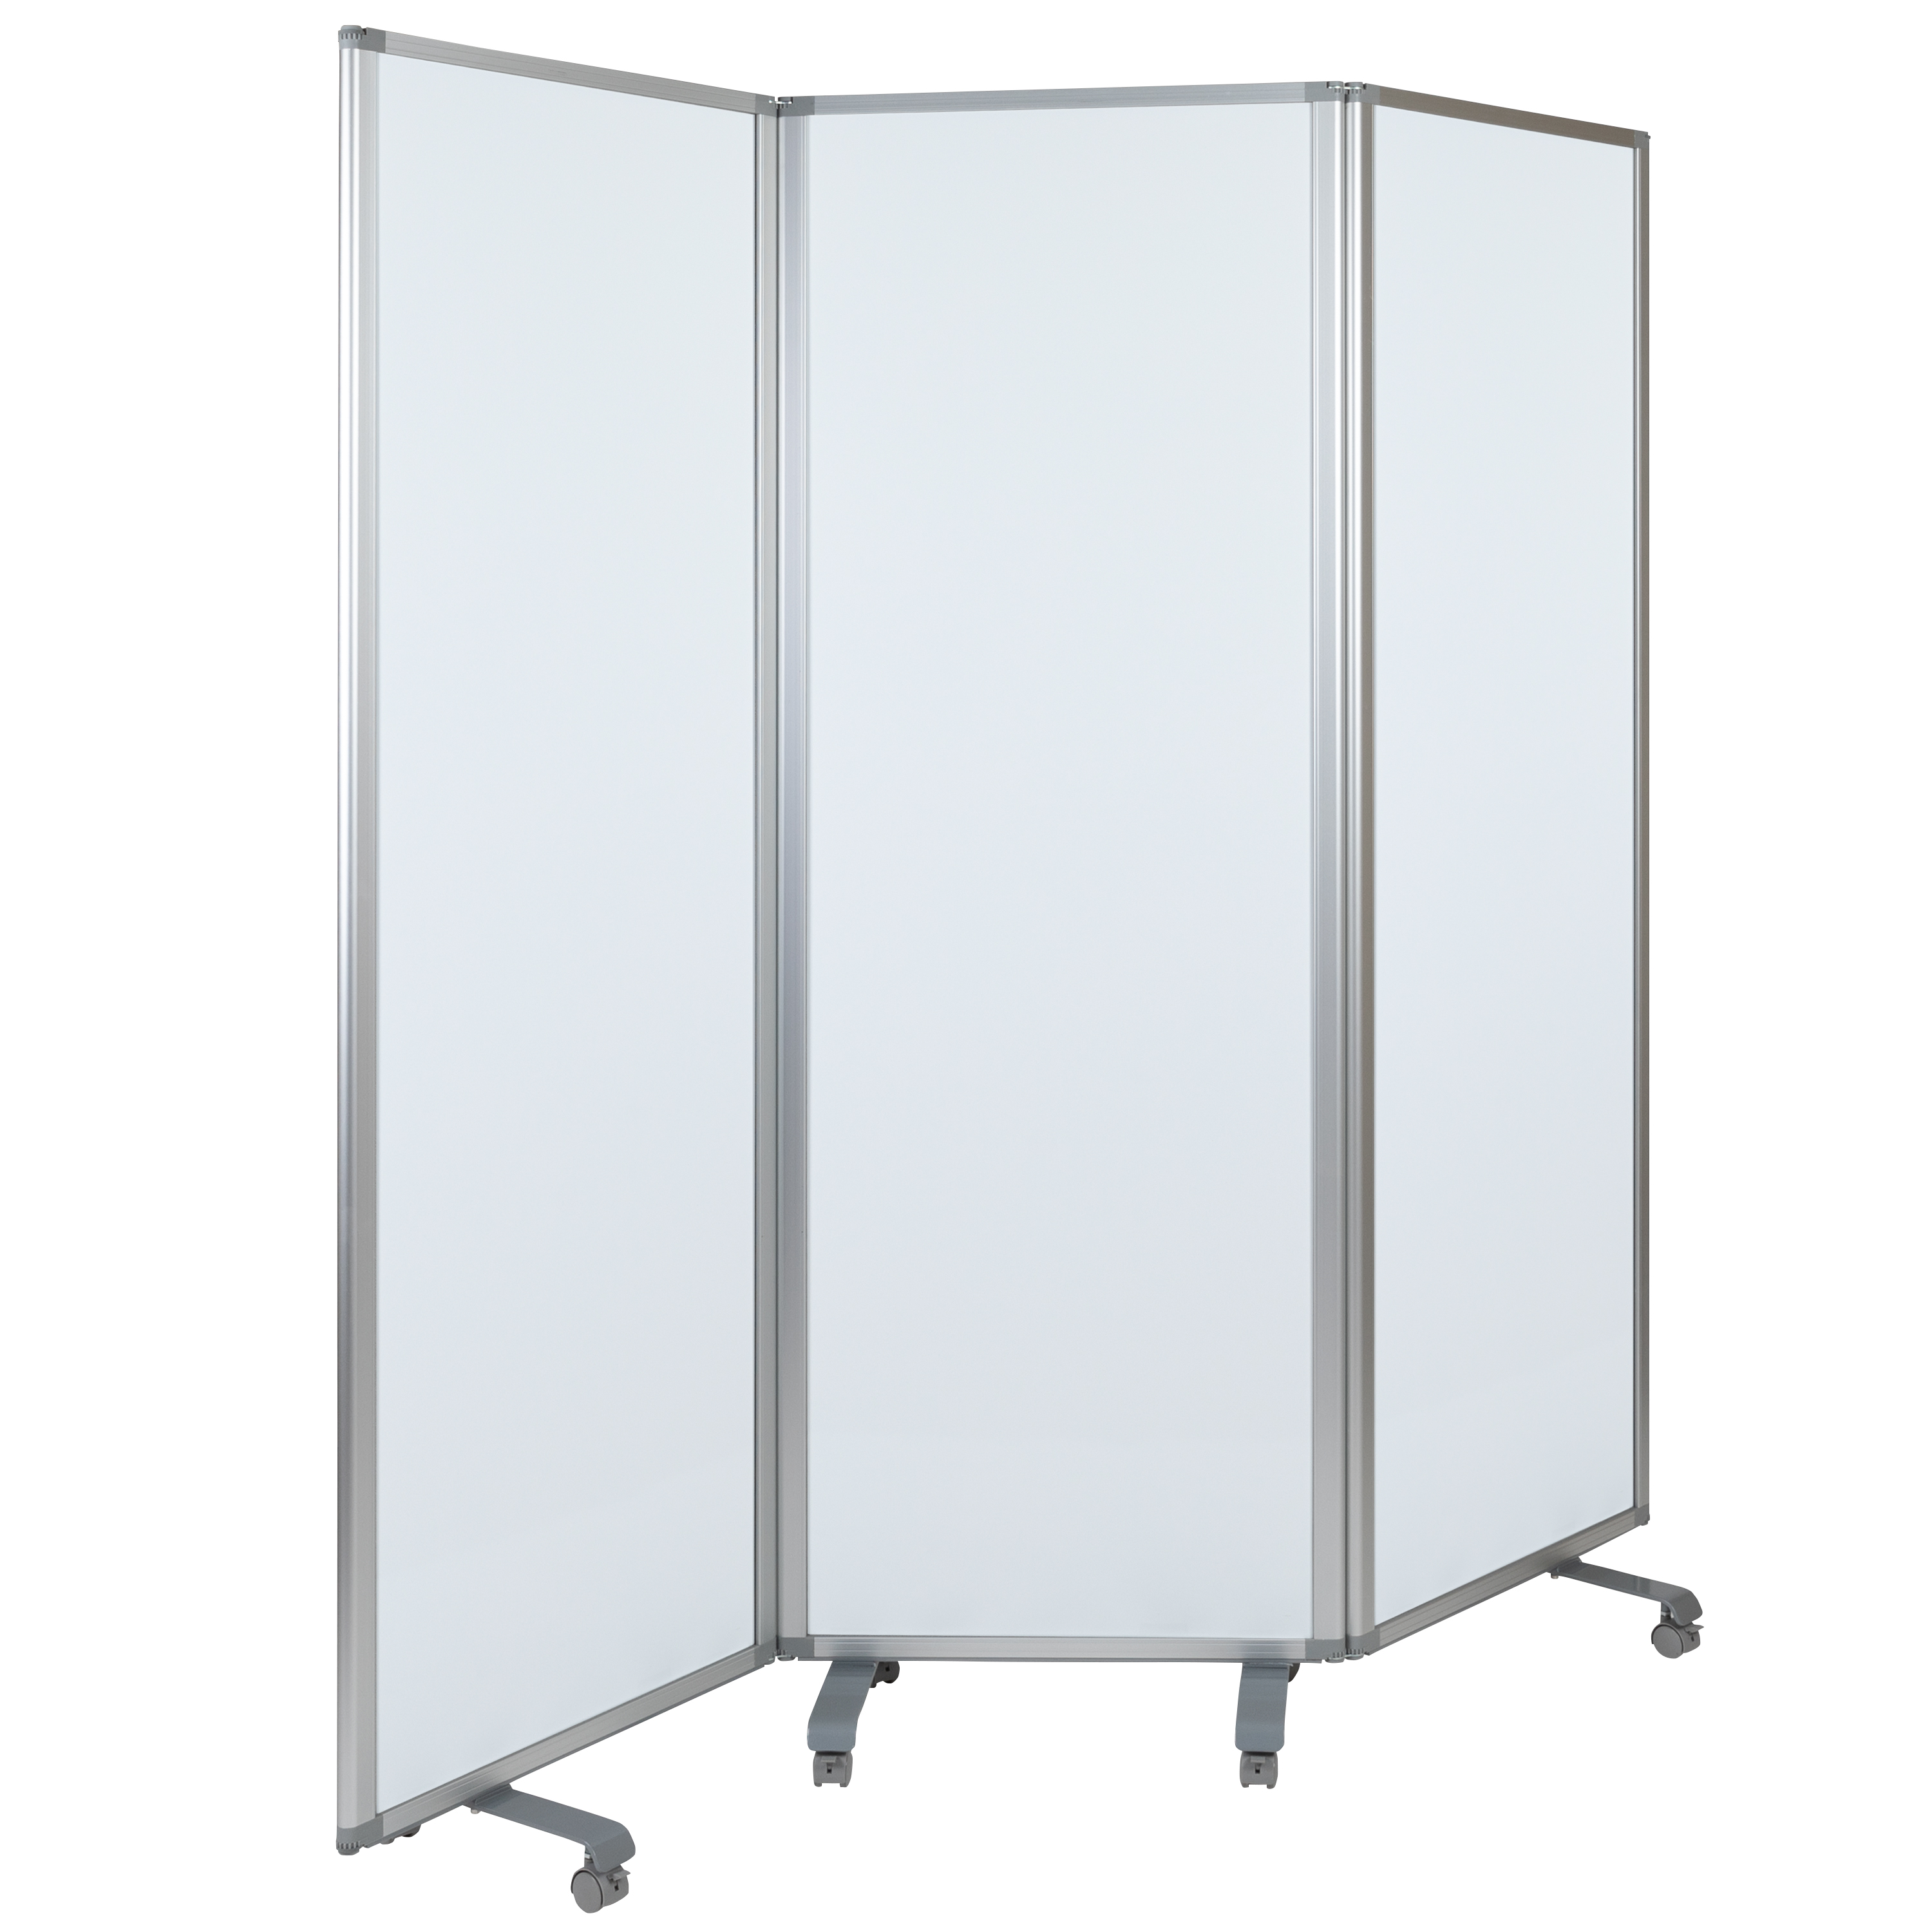 Flash Furniture BR-PTT001-3-M-60183-GG Mobile Magnetic 3-Section Whiteboard Partition with Lockable Casters, 72"H x 24"W